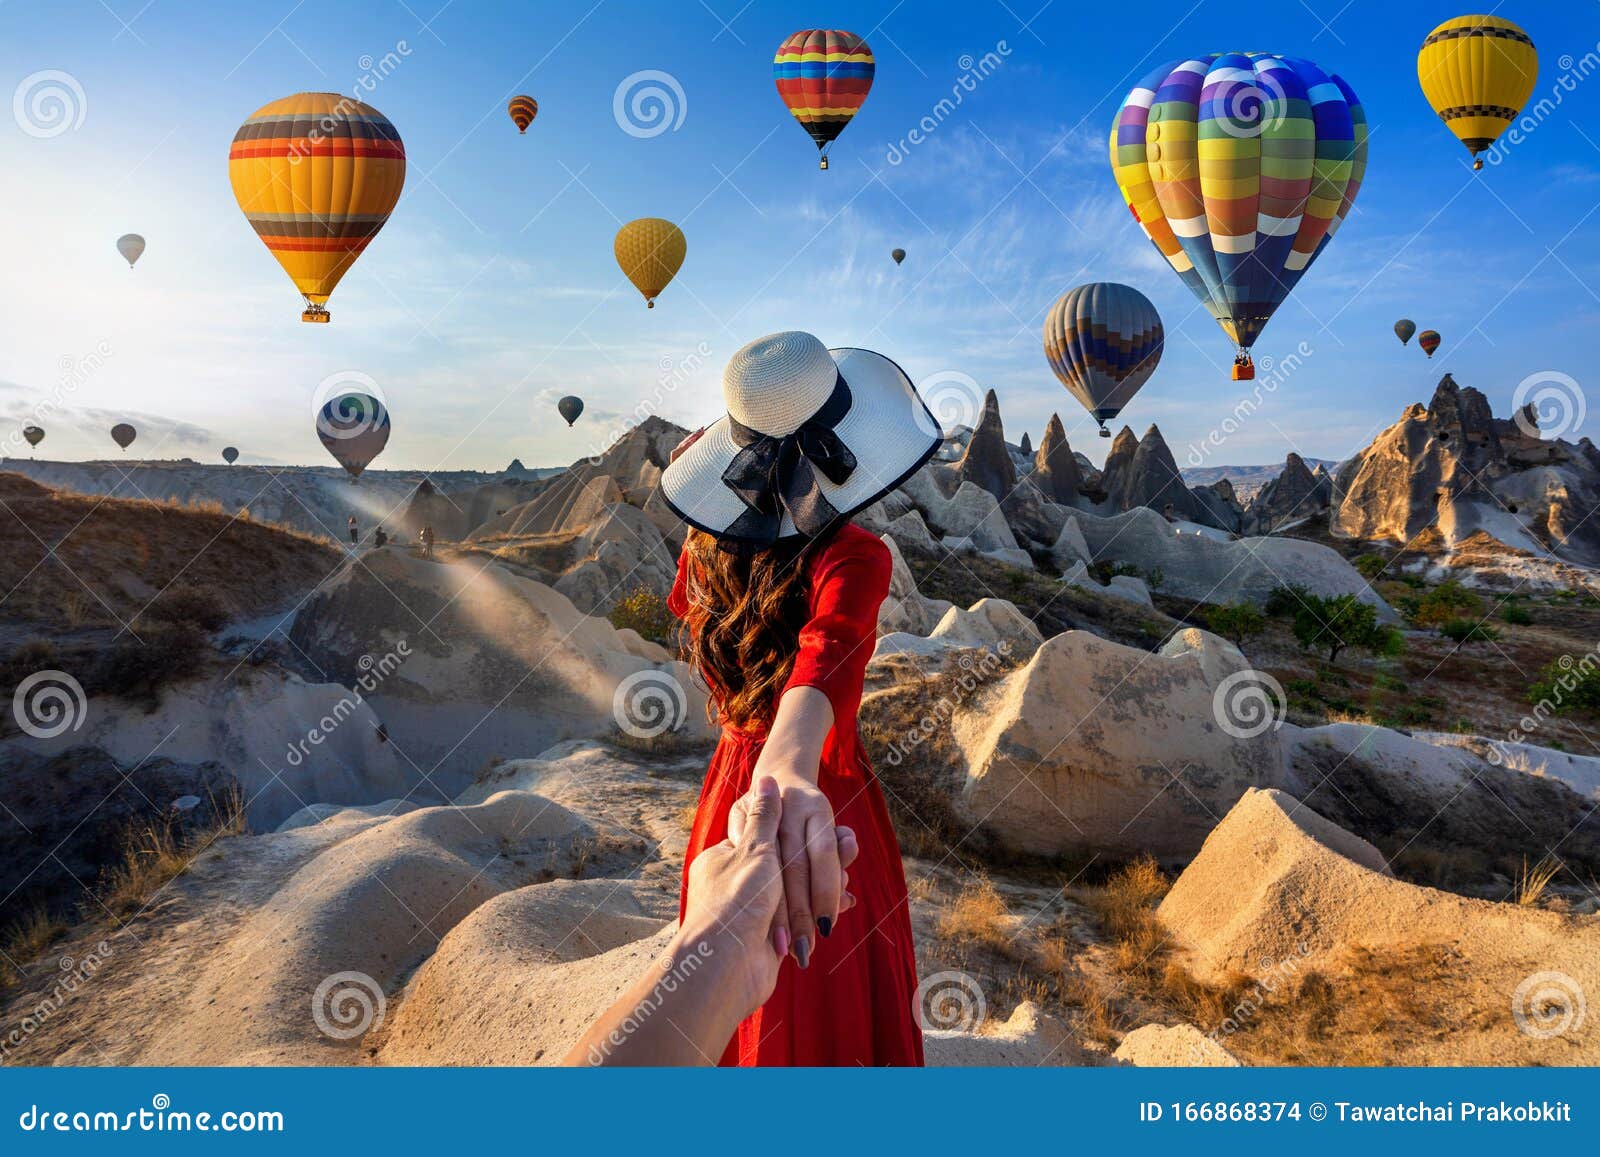 women tourists holding man`s hand and leading him to hot air balloons in cappadocia, turkey.